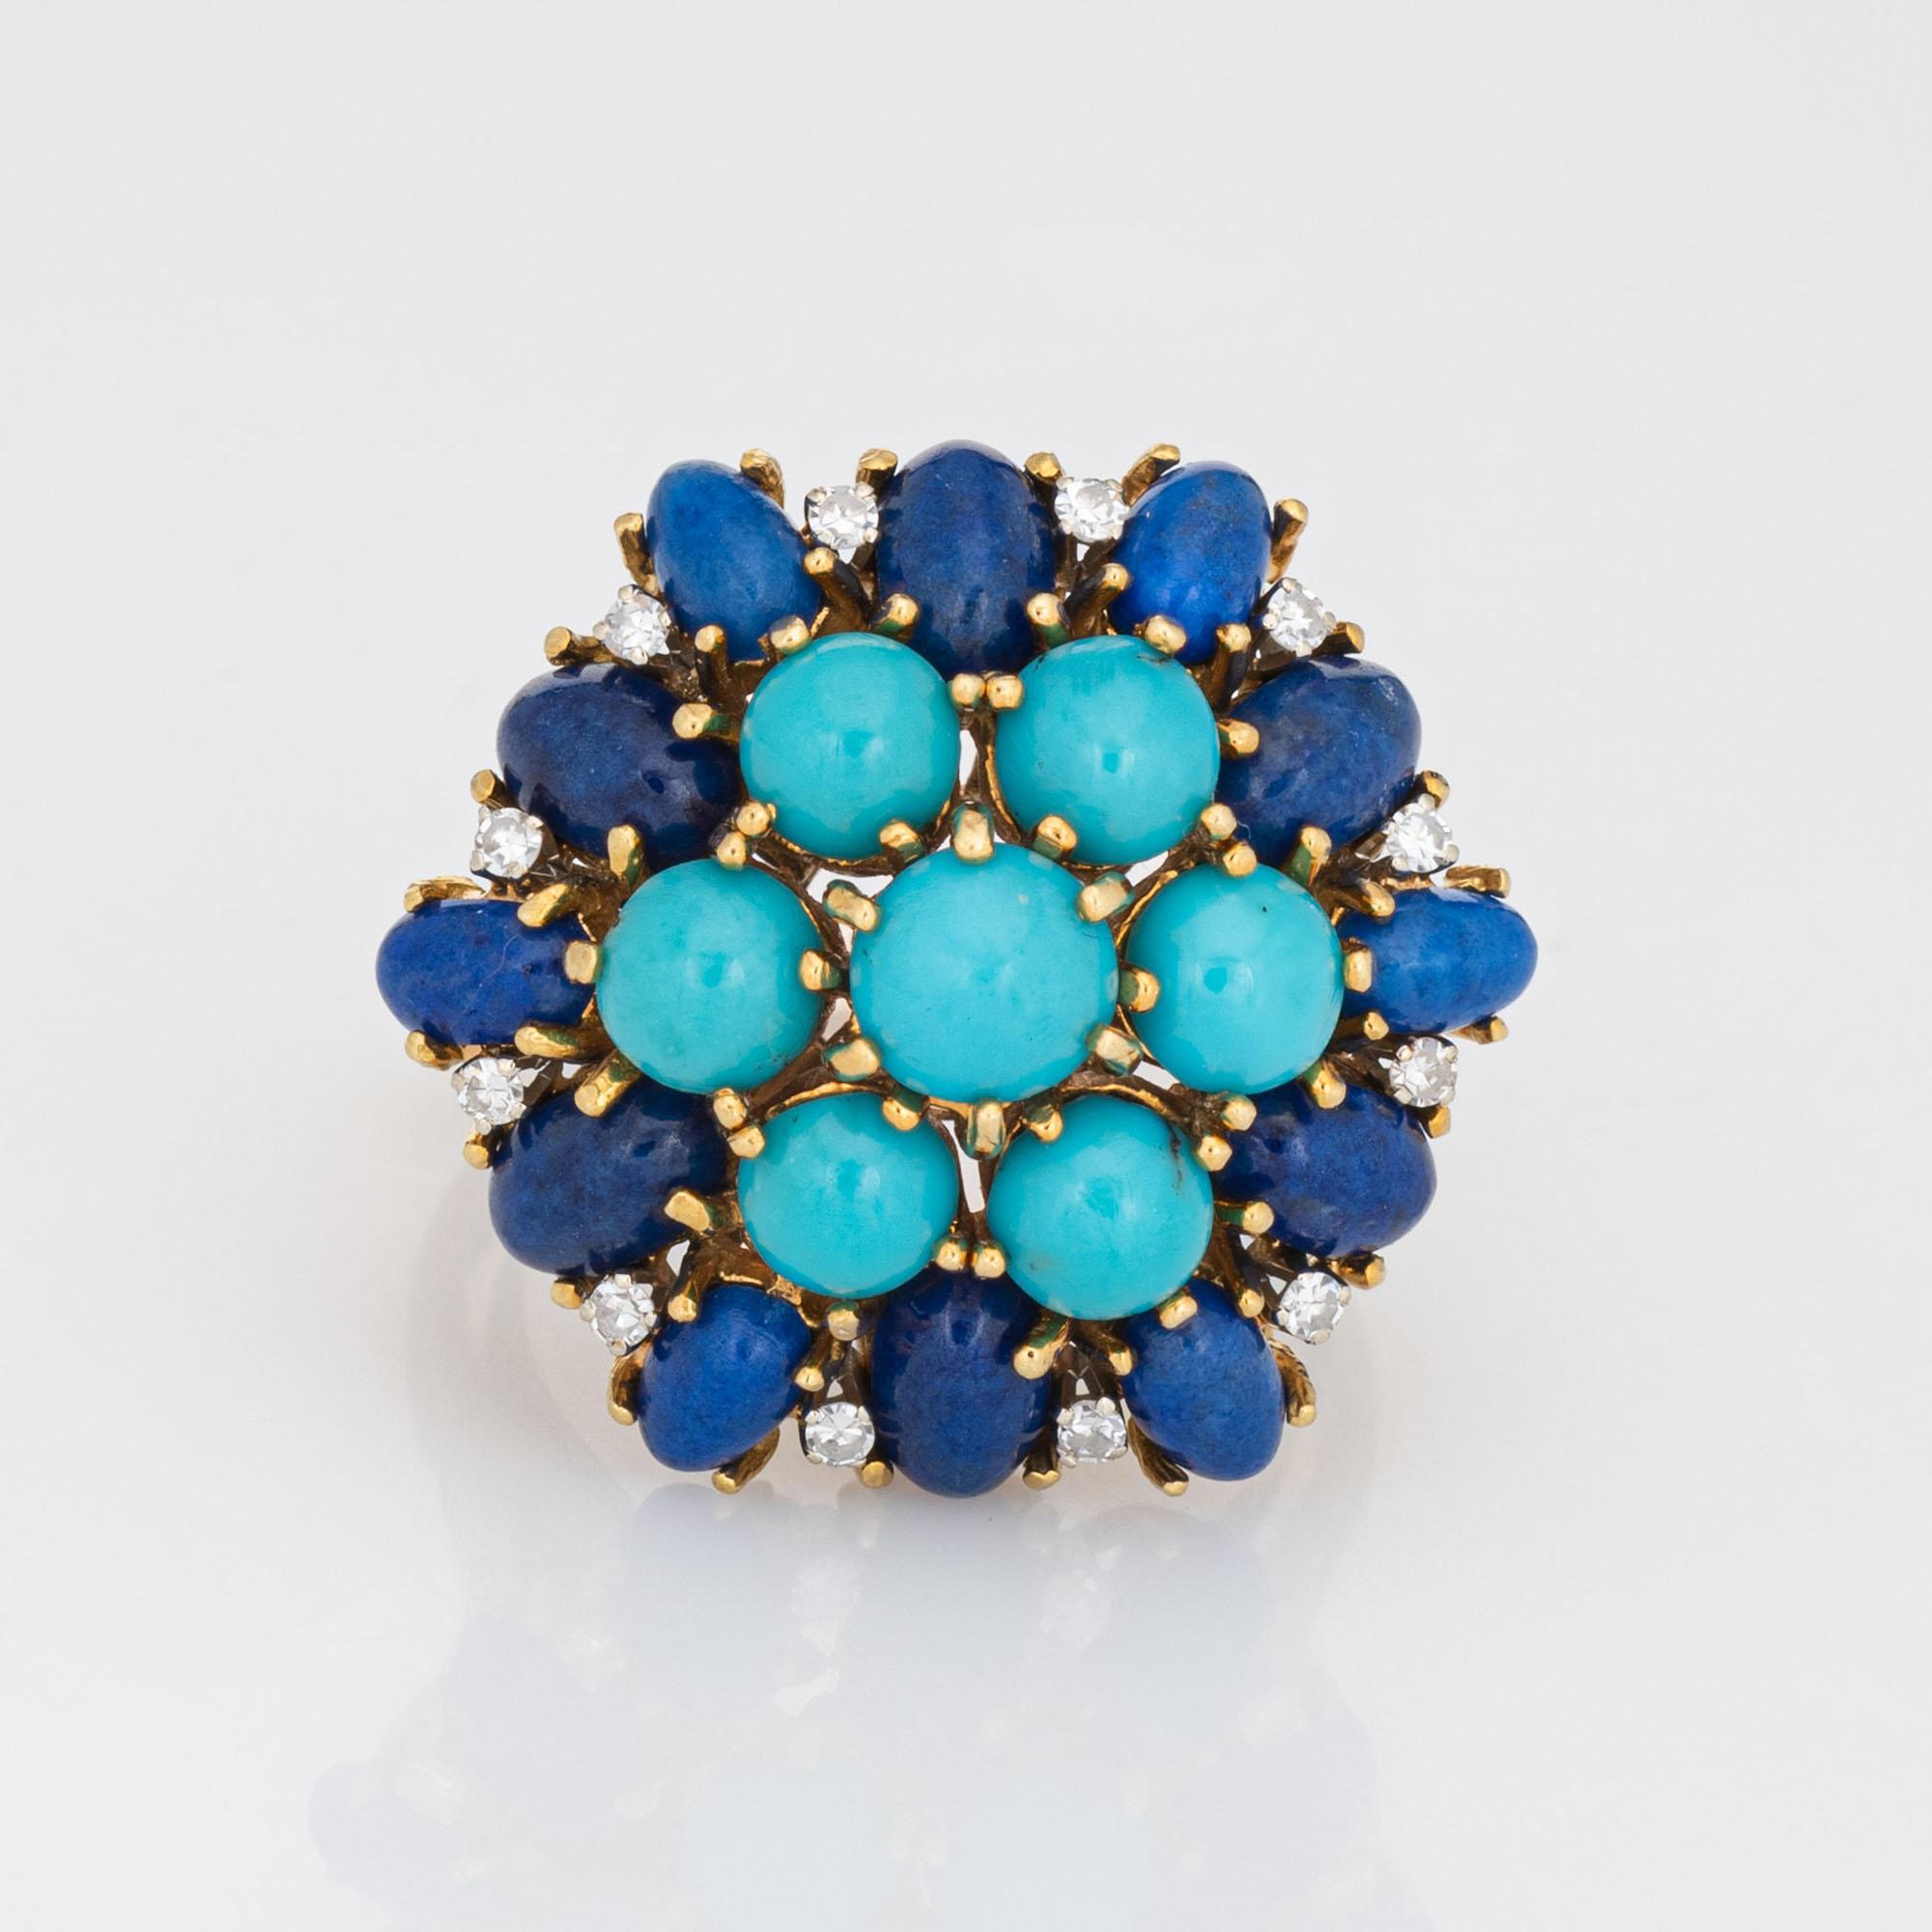 Stylish vintage lapis lazuli, turquoise & diamond ring (circa 1960s to 1970s) crafted in 18 karat yellow gold. 

7 cabochon cut pieces of turquoise measure 4.5mm to 5mm each (3.50 carats total estimated weight), accented 12 pieces of oval cut lapis